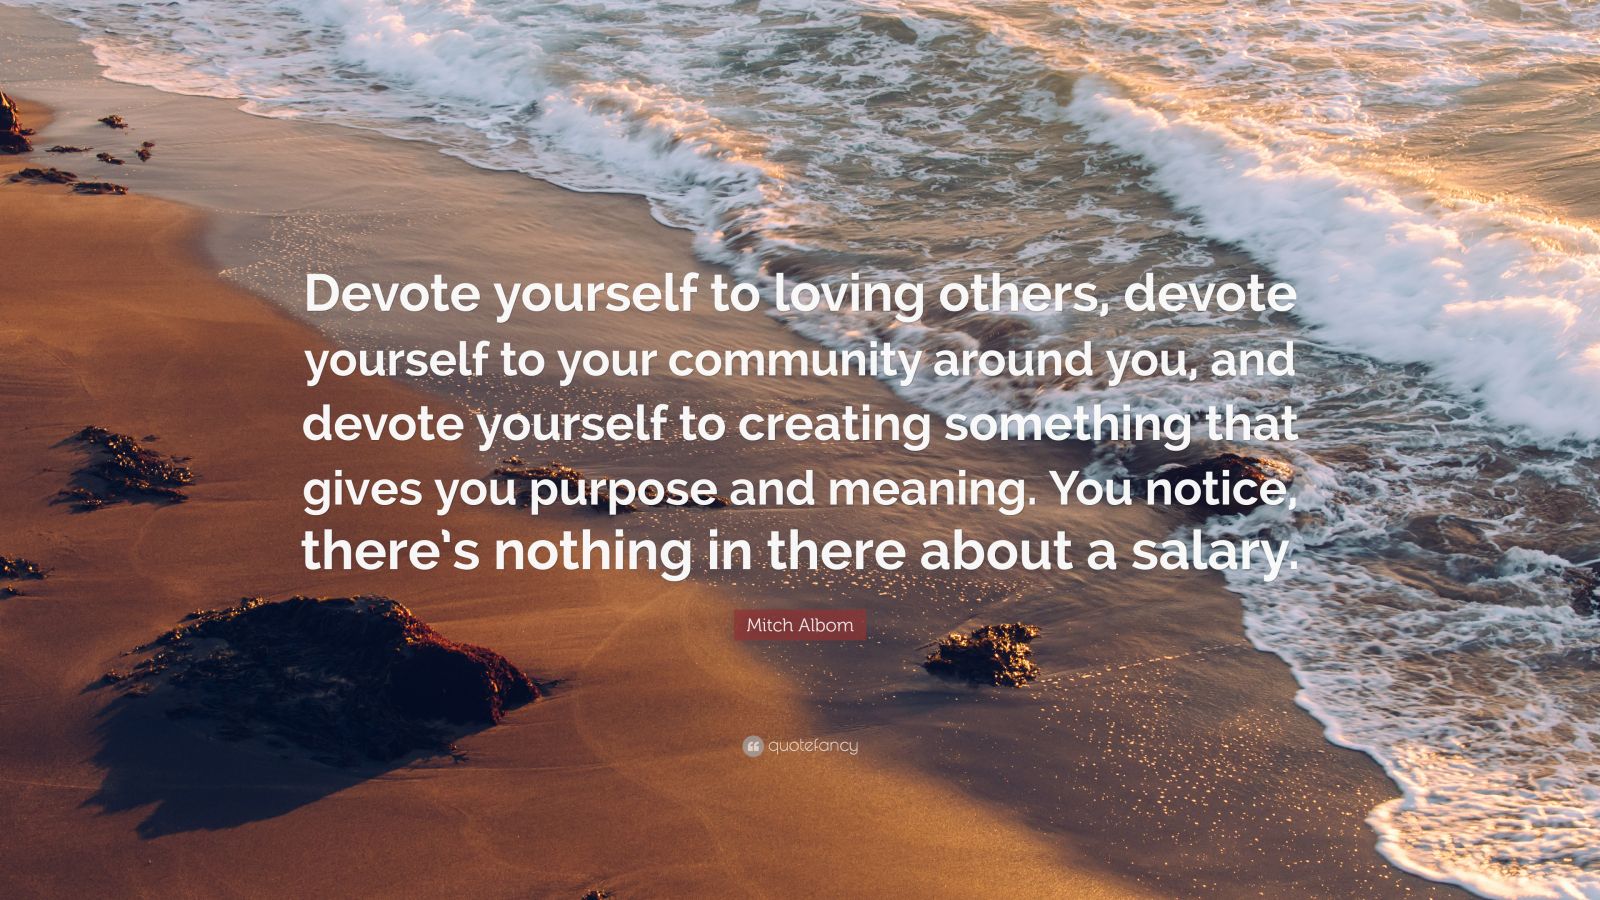 Mitch Albom Quote “devote Yourself To Loving Others Devote Yourself To Your Community Around